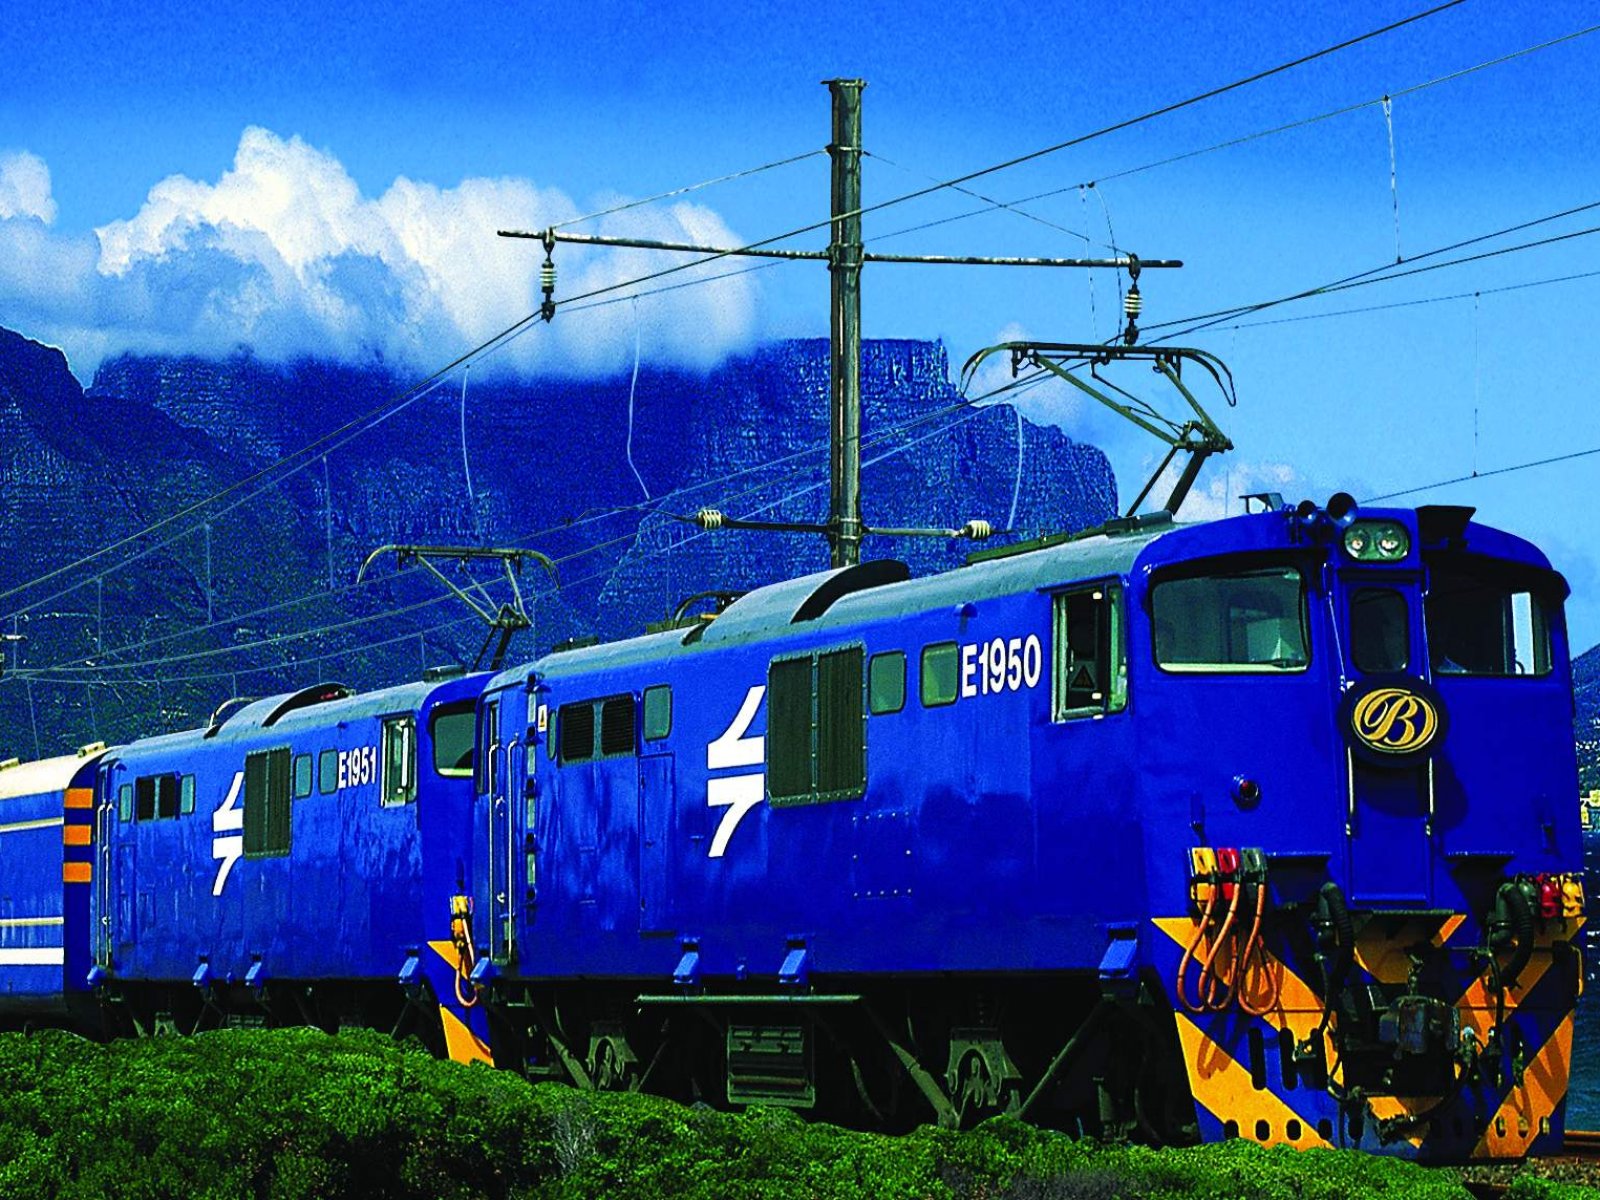 How to ride on the Blue Train in Cape Town